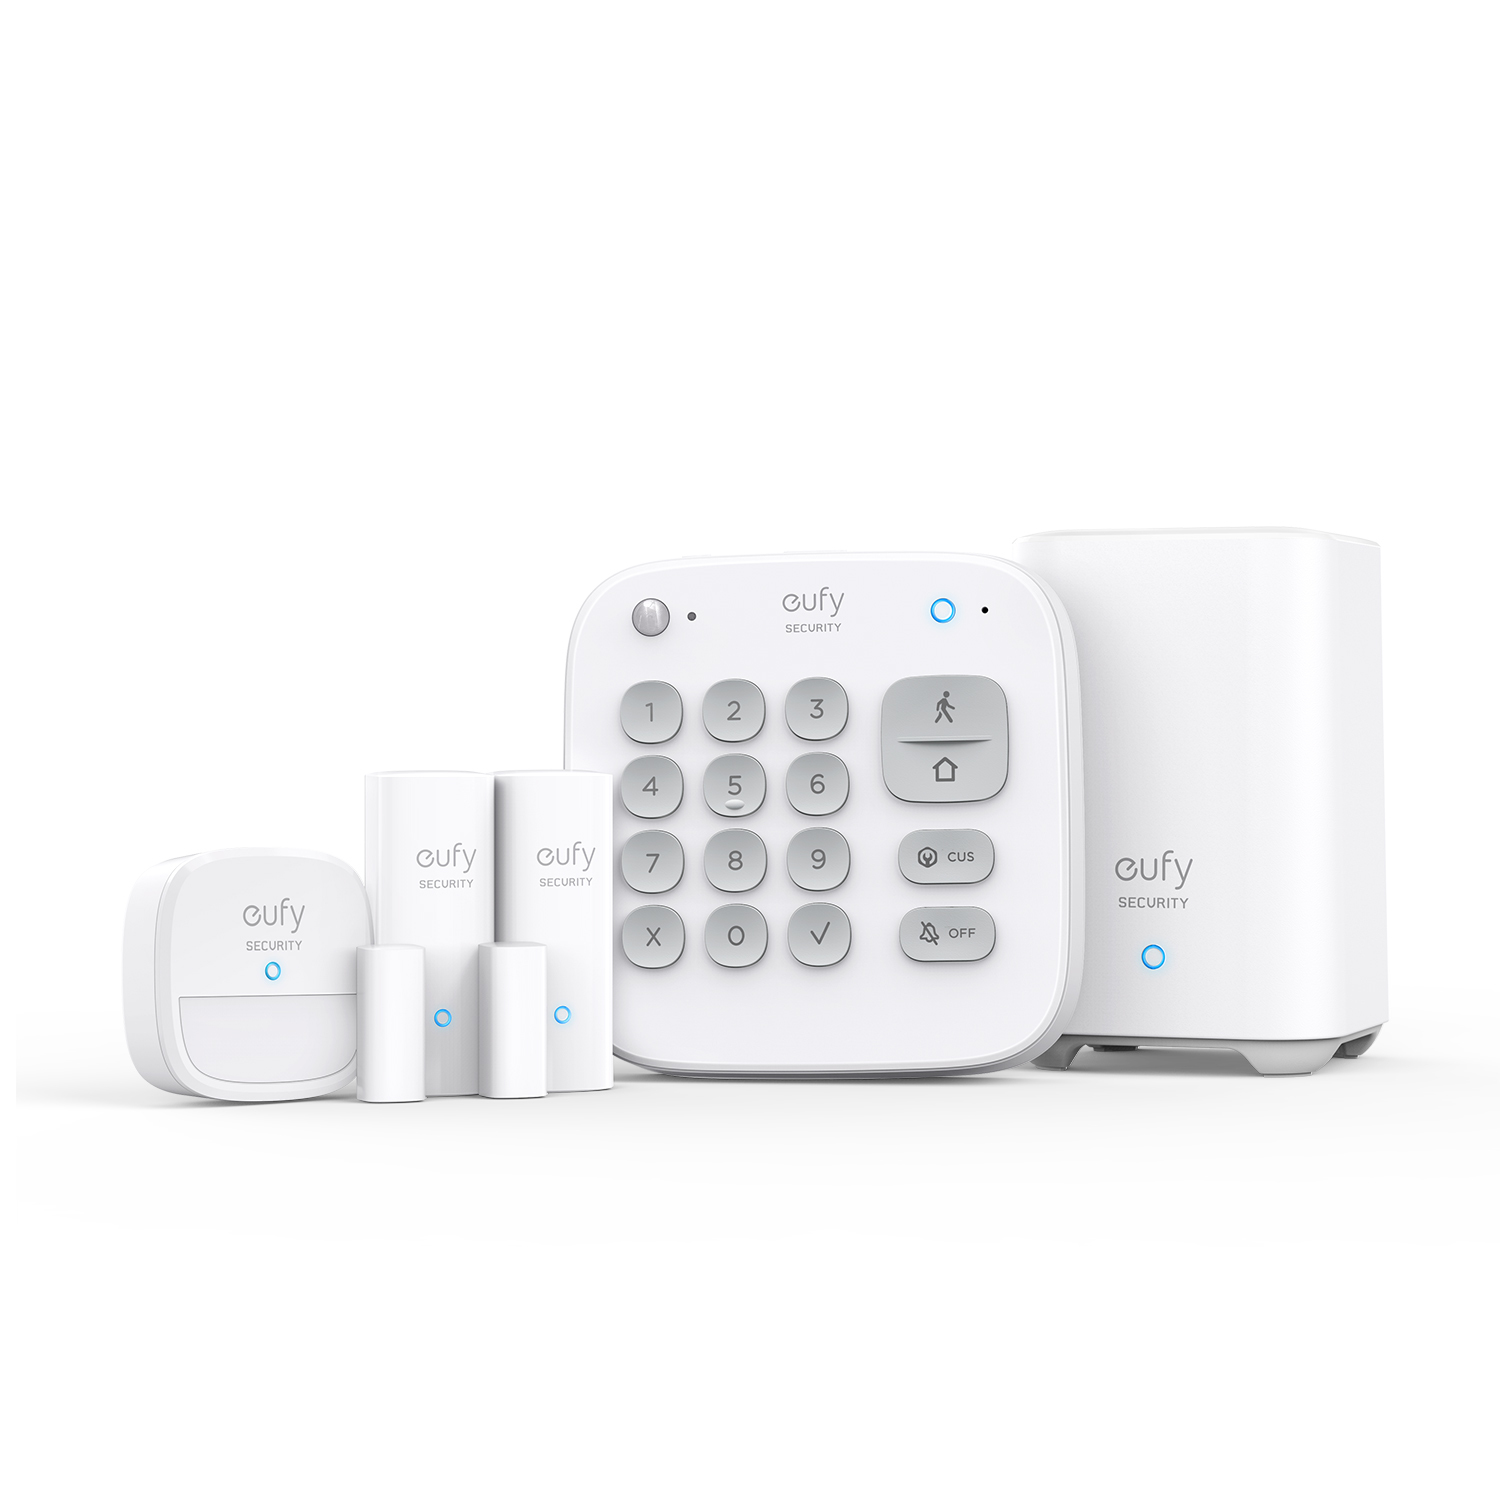 Eufy Security 5 Piece Home Alarm Kit T8990321 - WC01